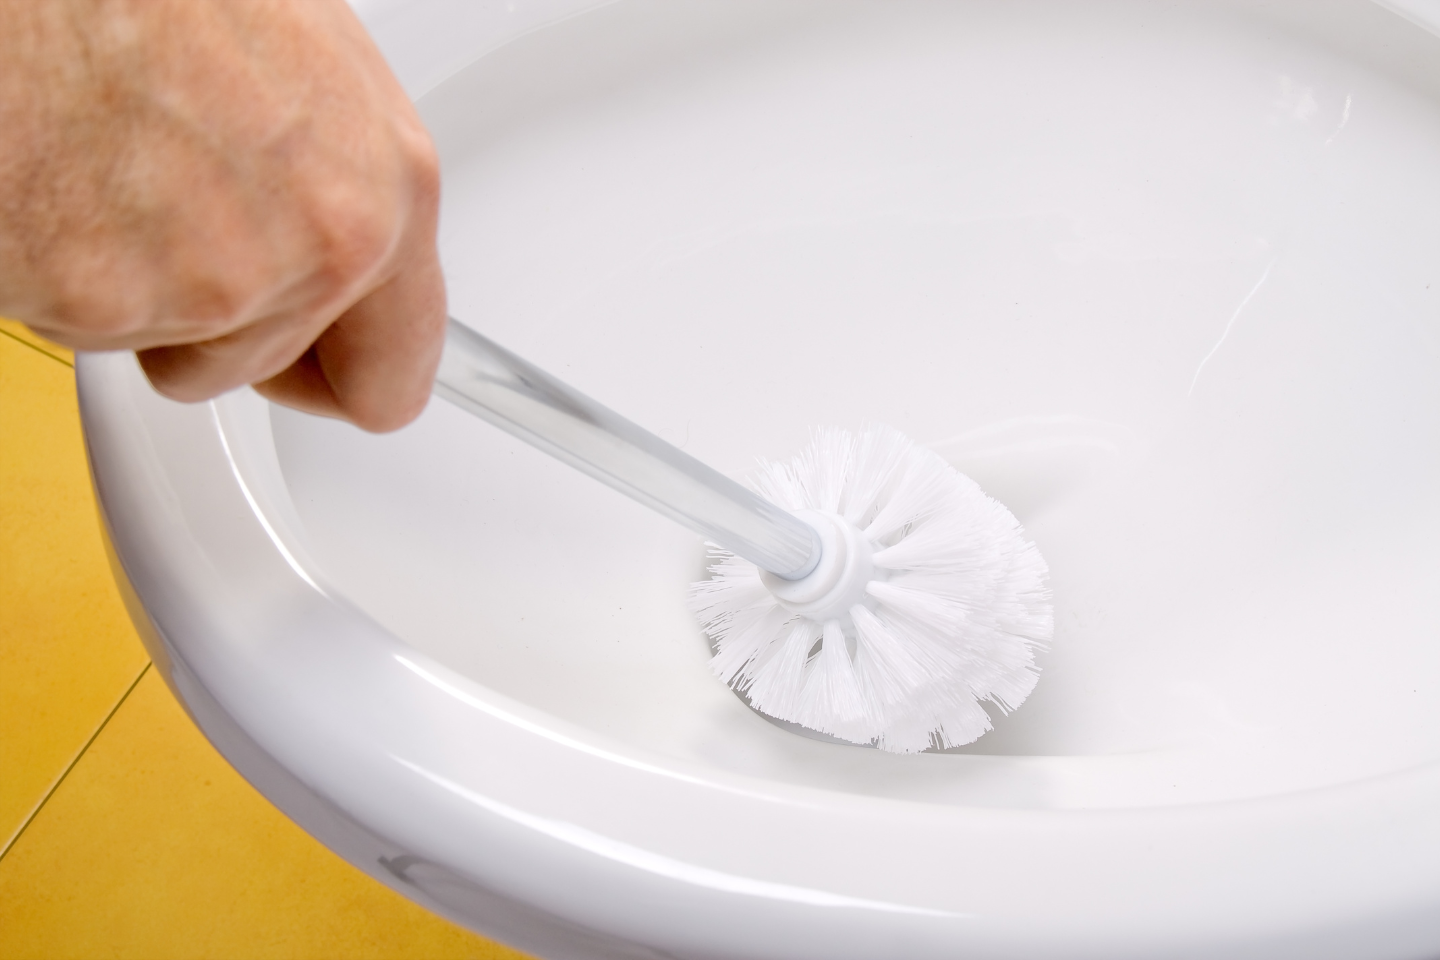 Someone cleaning a toilet bowl with a toilet brush.